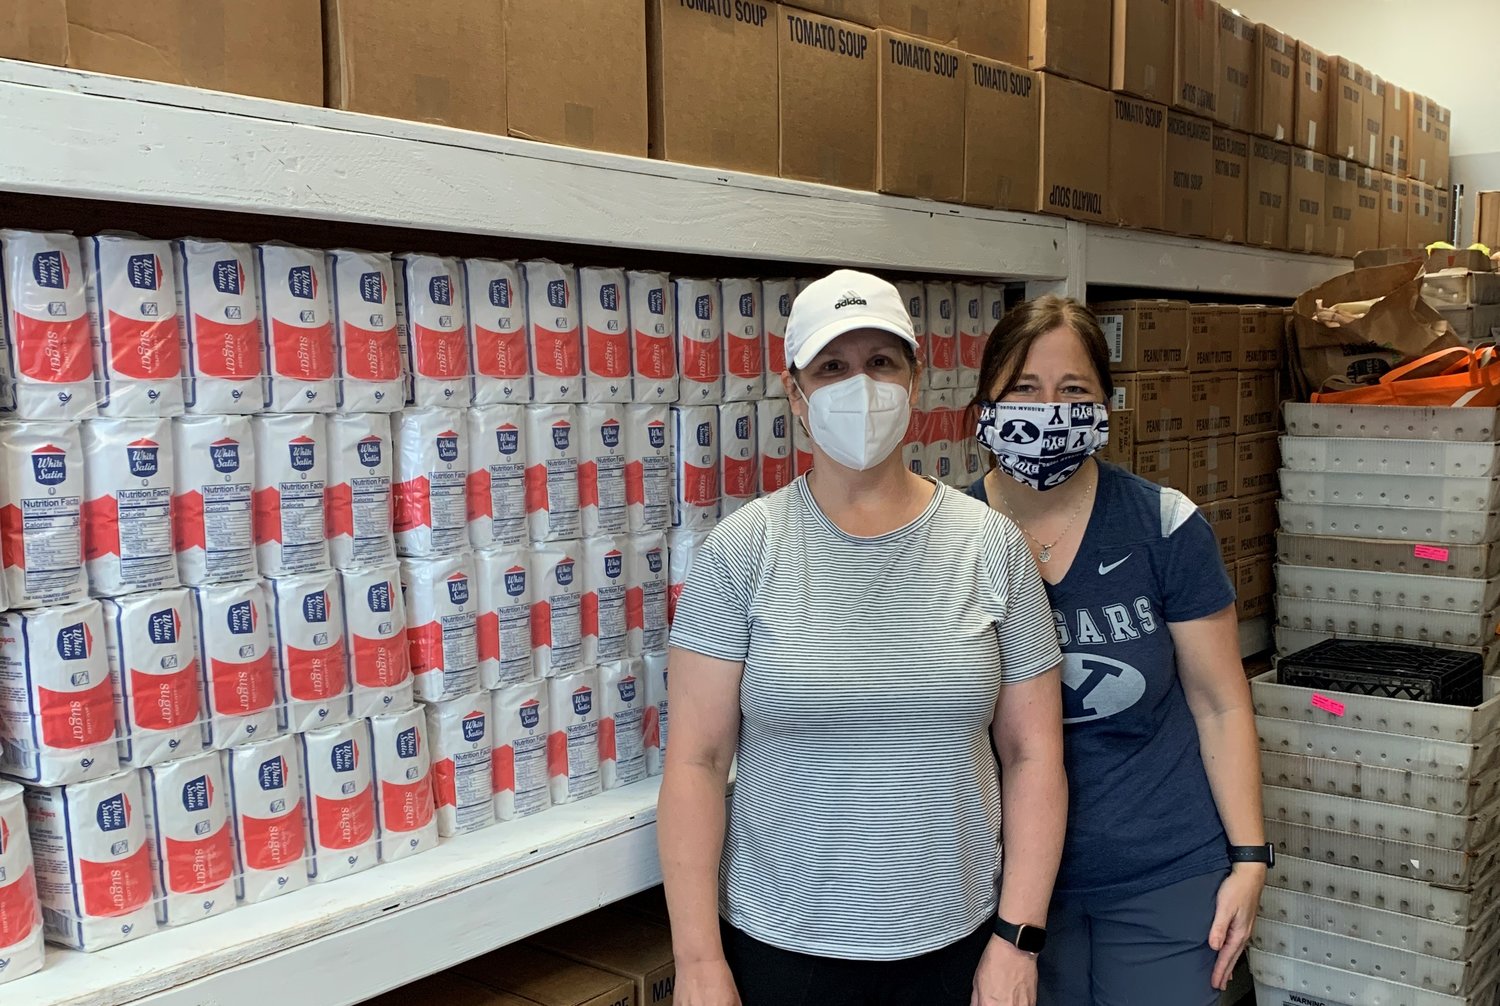 Volunteers helped place 20,000 pounds of food on the shelves at Katy Christian Ministries’ Food Pantry which has seen increased demand due to area residents being out of work during the COVID-19 pandemic.